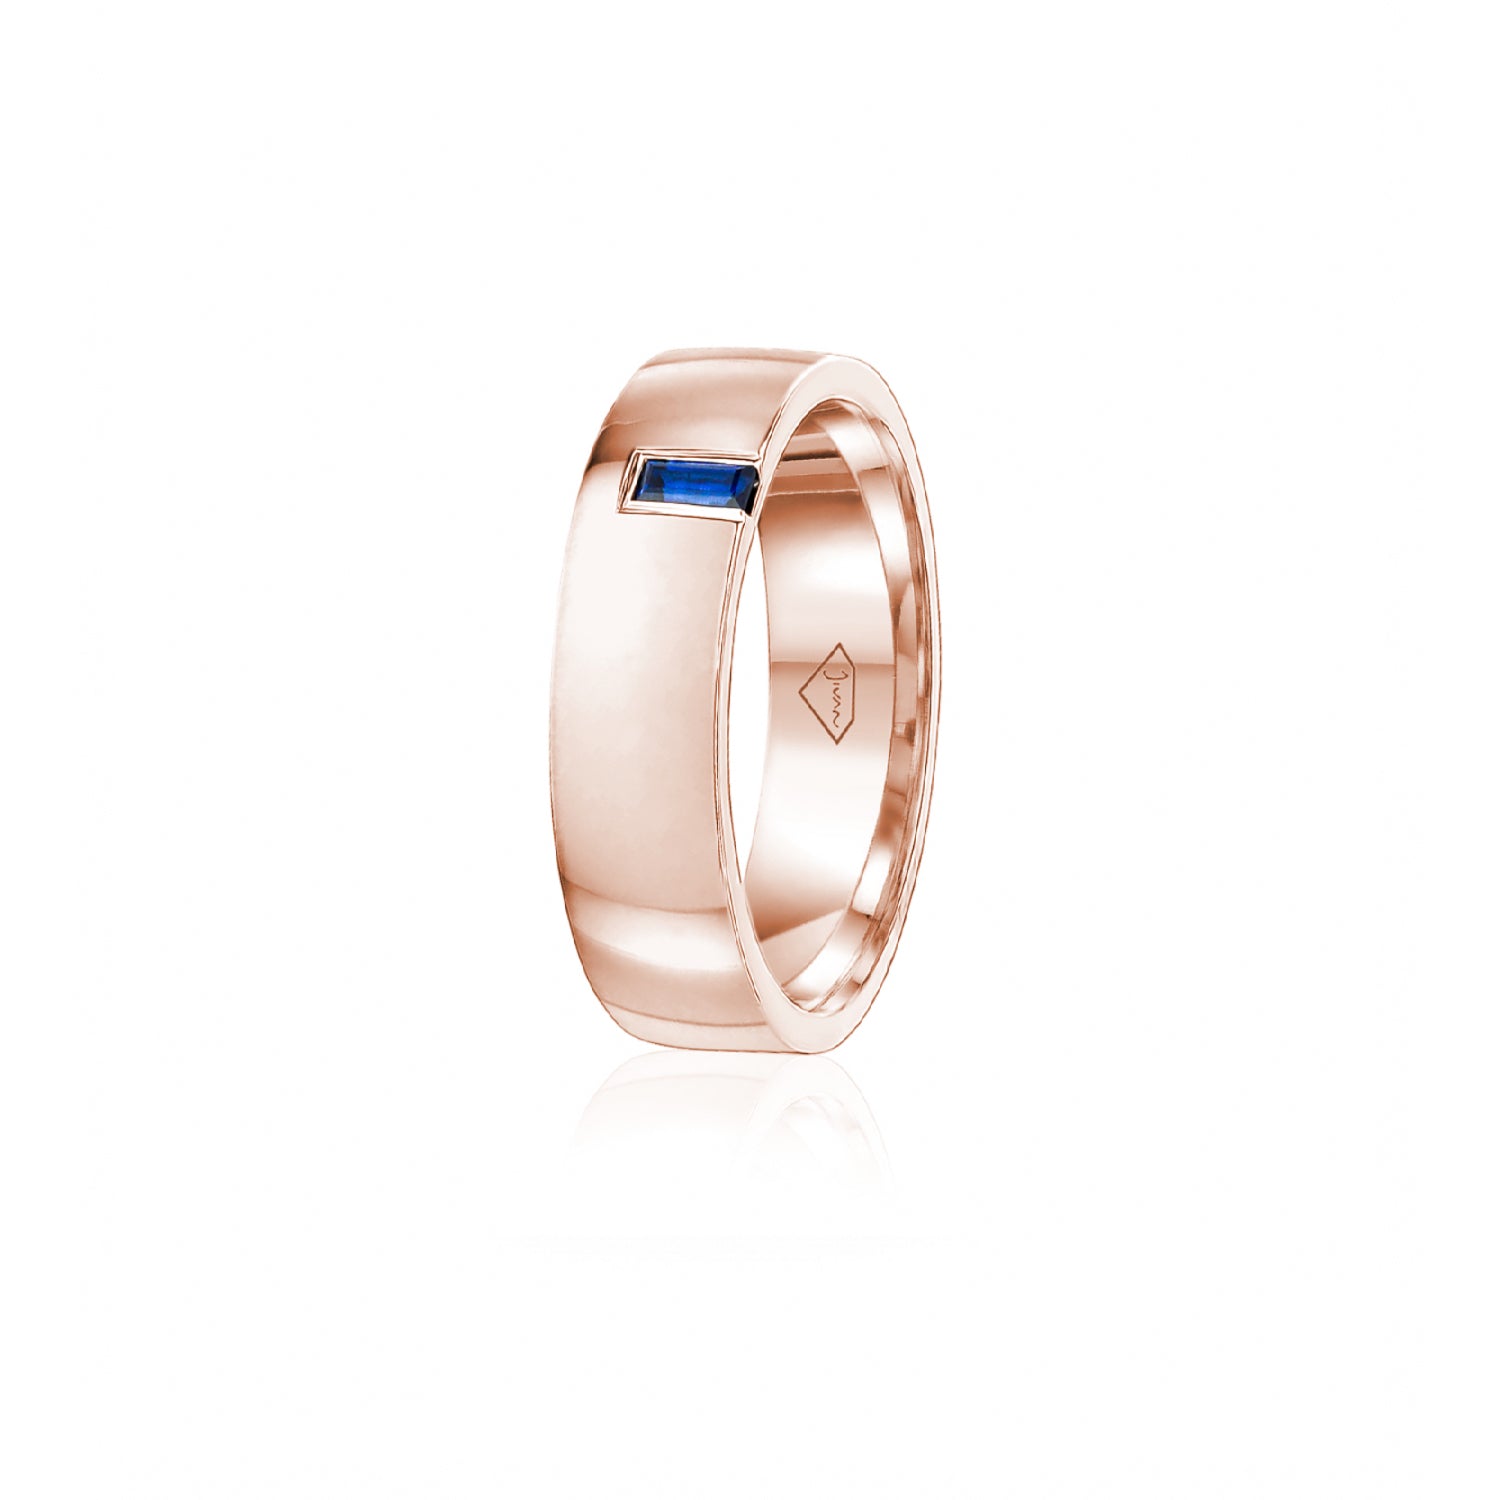 Sapphire Accent Polished Finish Comfort Fit 6-7 mm Wedding Ring in Rose Gold